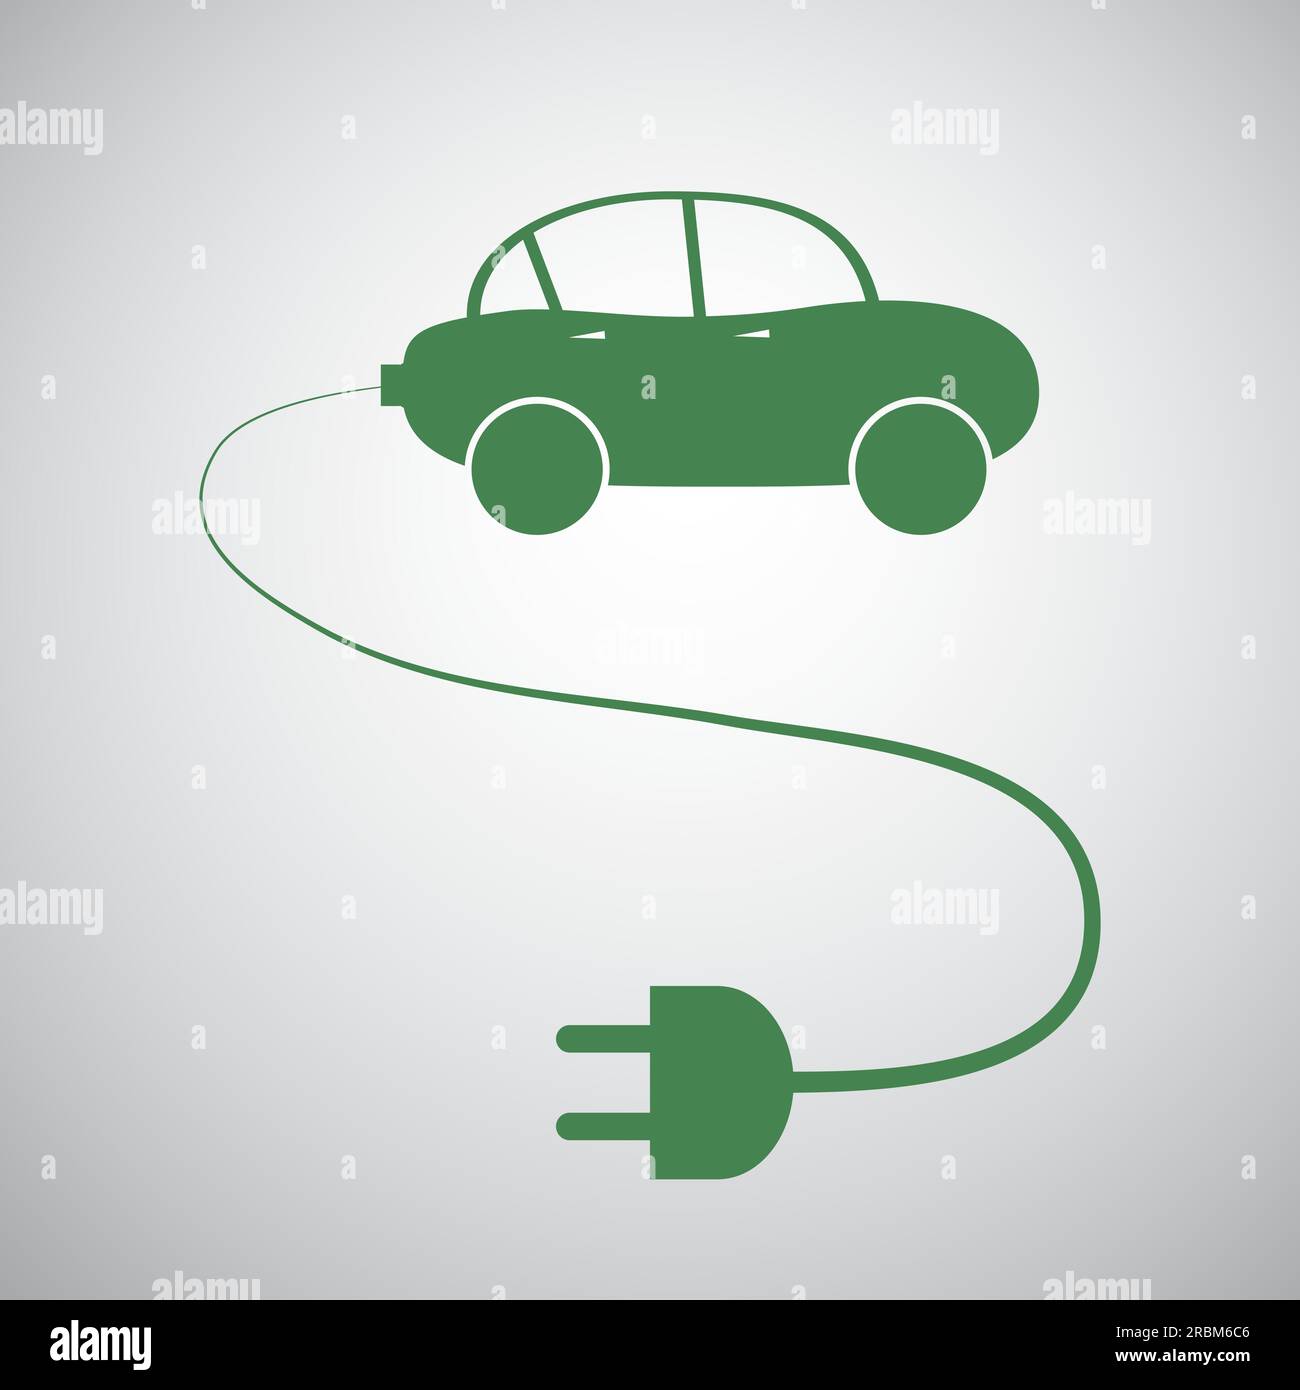 Electric Vehicle - Eco Friendly Car Icon Design Template Stock Vector